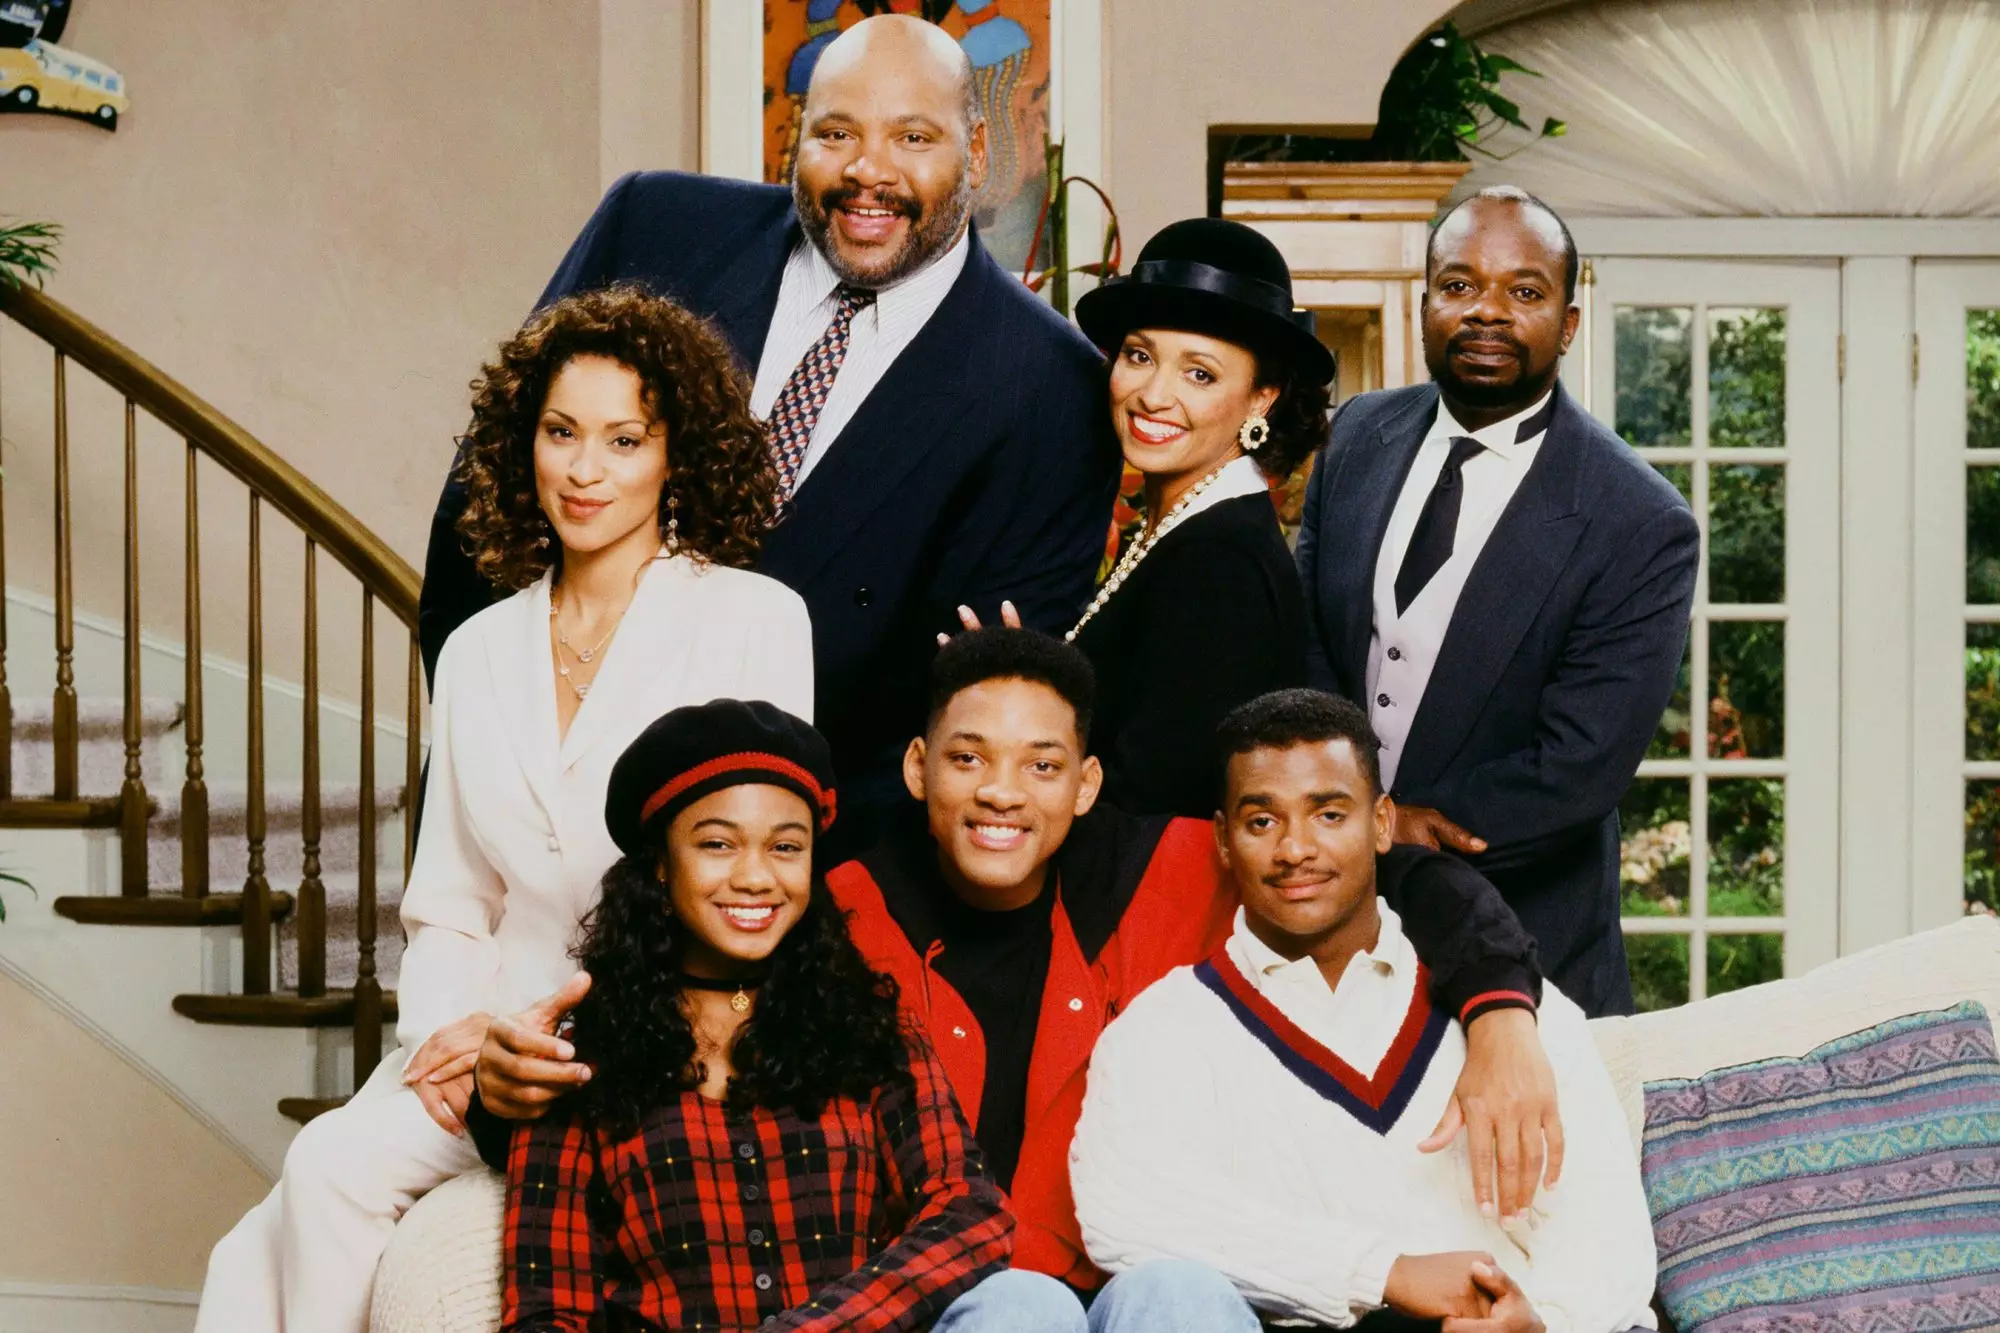 The OG Will Smith cast will be back (